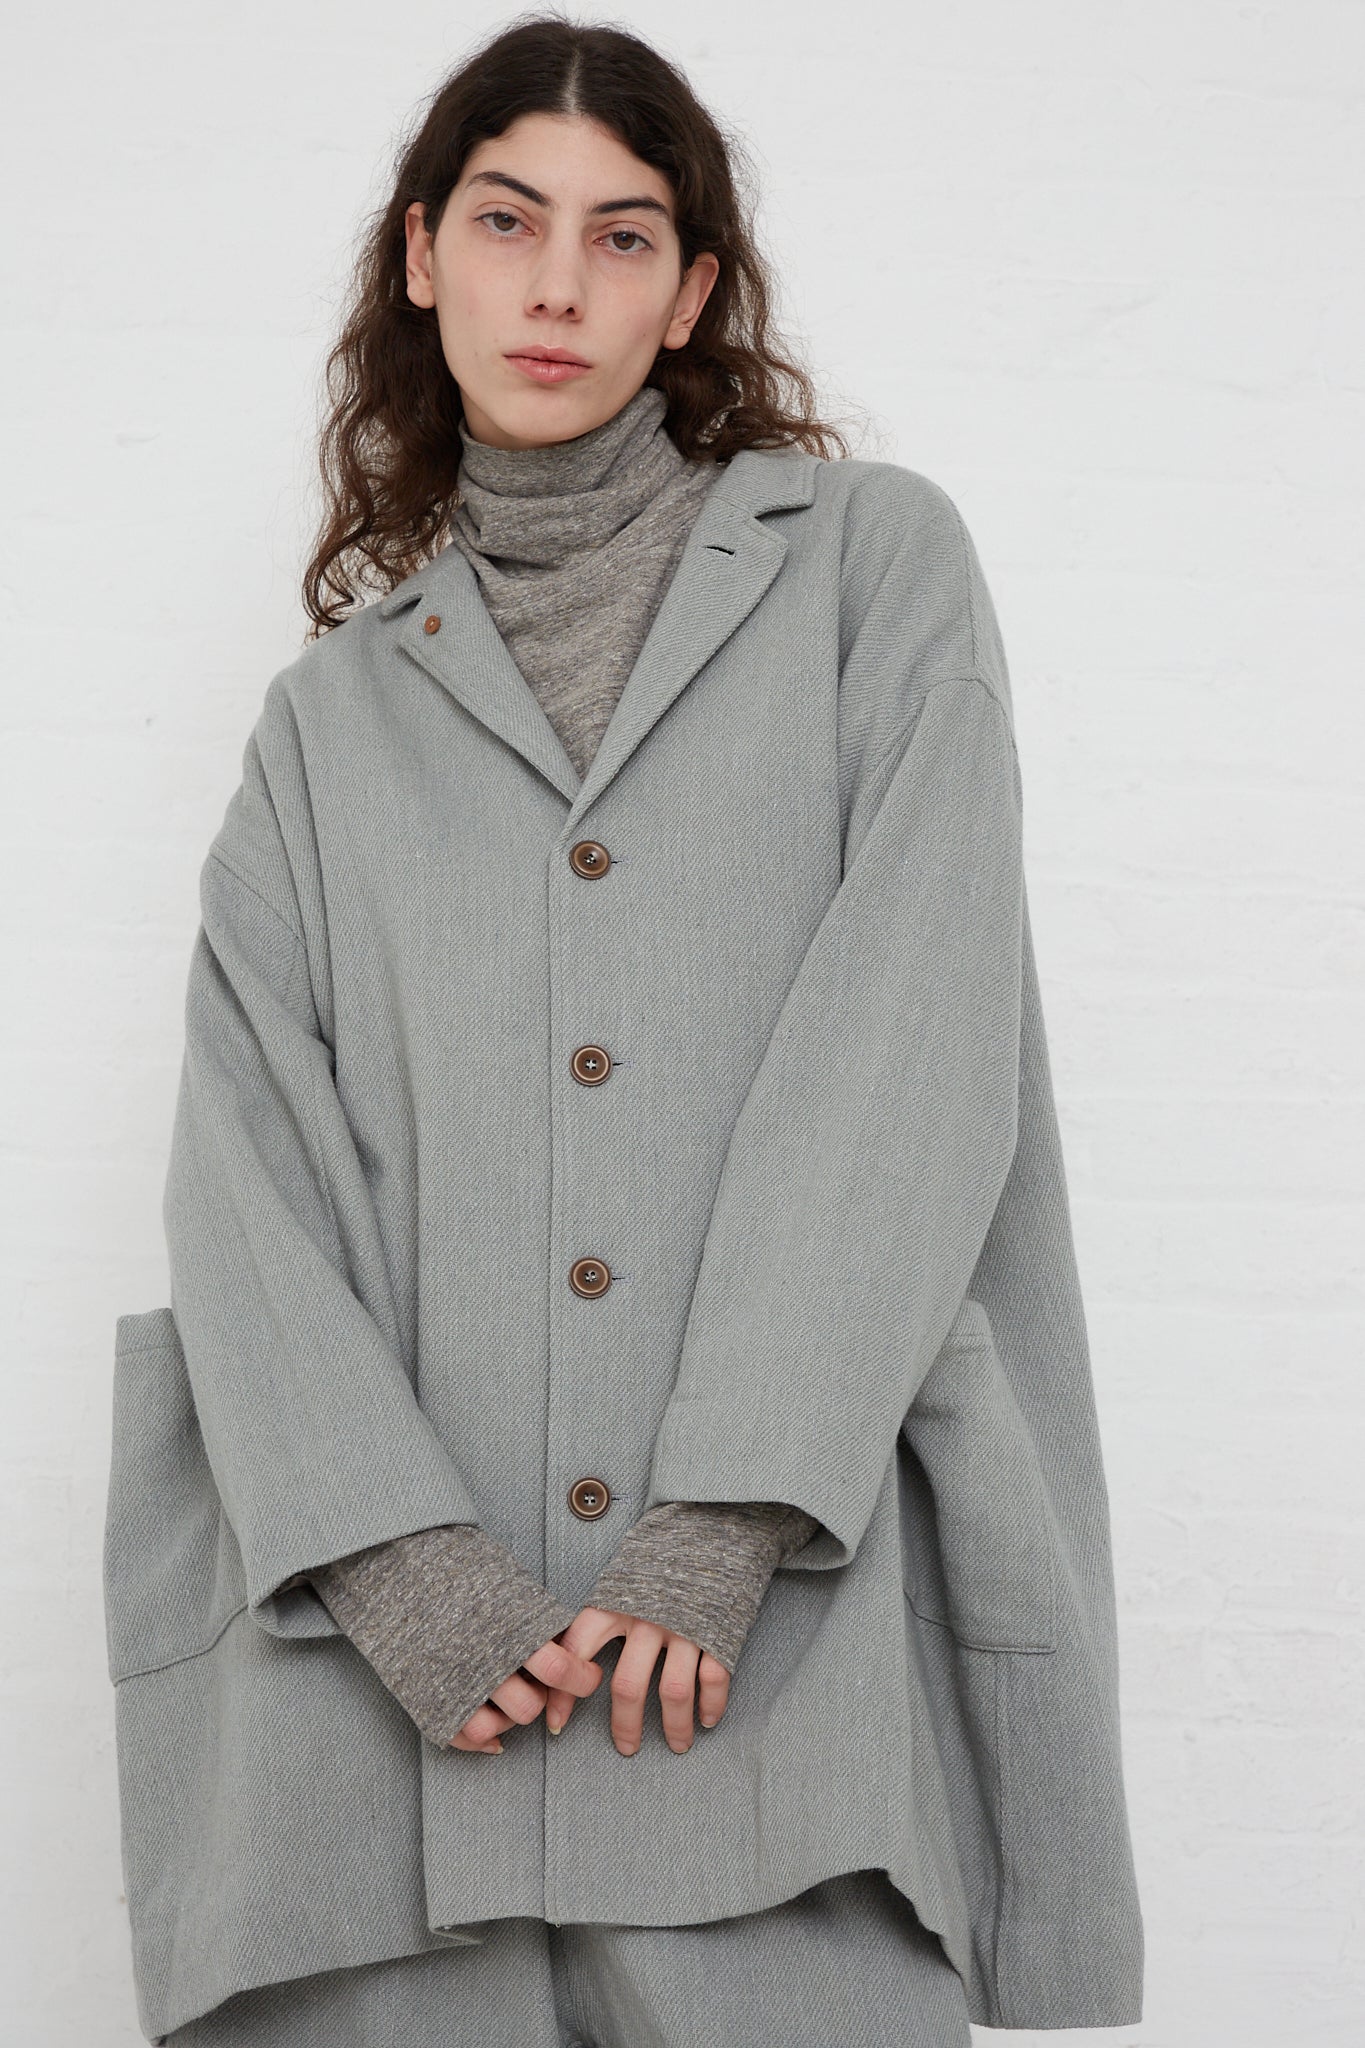 The model is wearing an oversized grey coat with patch pockets and a turtleneck made of Merino Wool Orihimedaki Jacket in Blue from Ichi Antiquités.